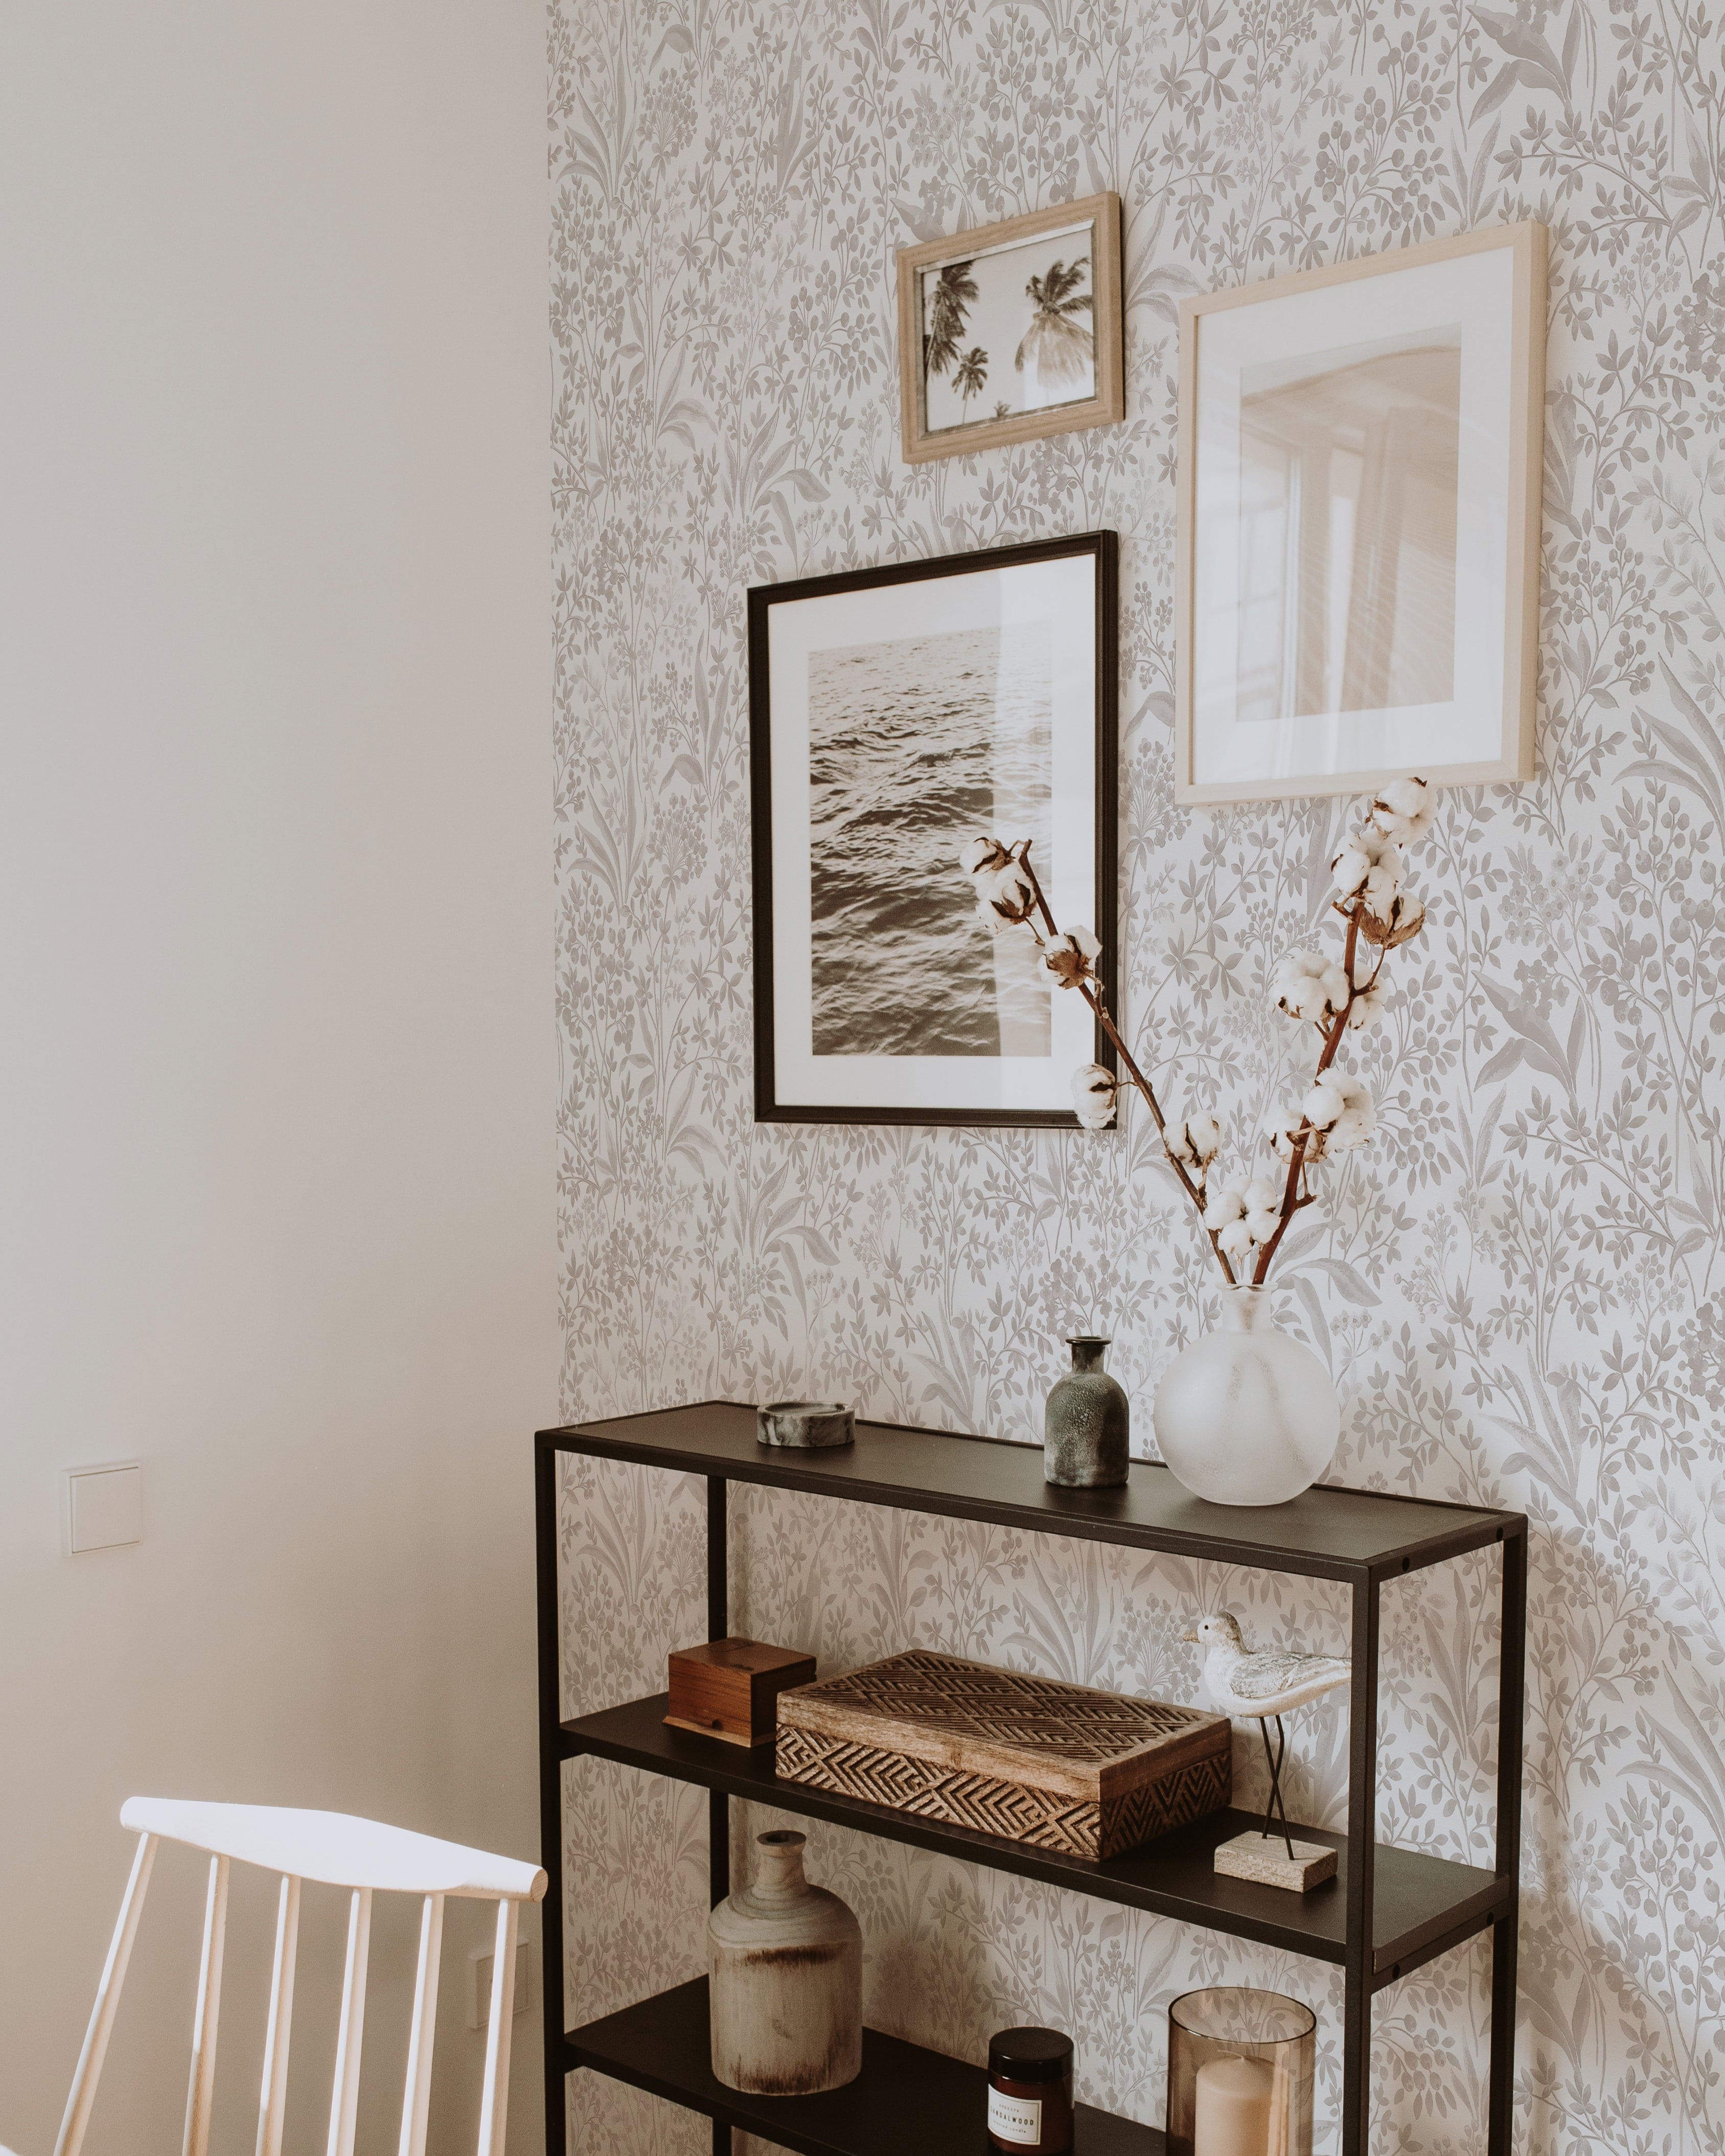 A modern display area enhanced by the Harmony in Bloom Wallpaper, showcasing a dense floral design in soft gray and beige tones. The wall is accessorized with framed photographs and a minimalist black metal shelf with decorative items, blending contemporary design with classic elegance.